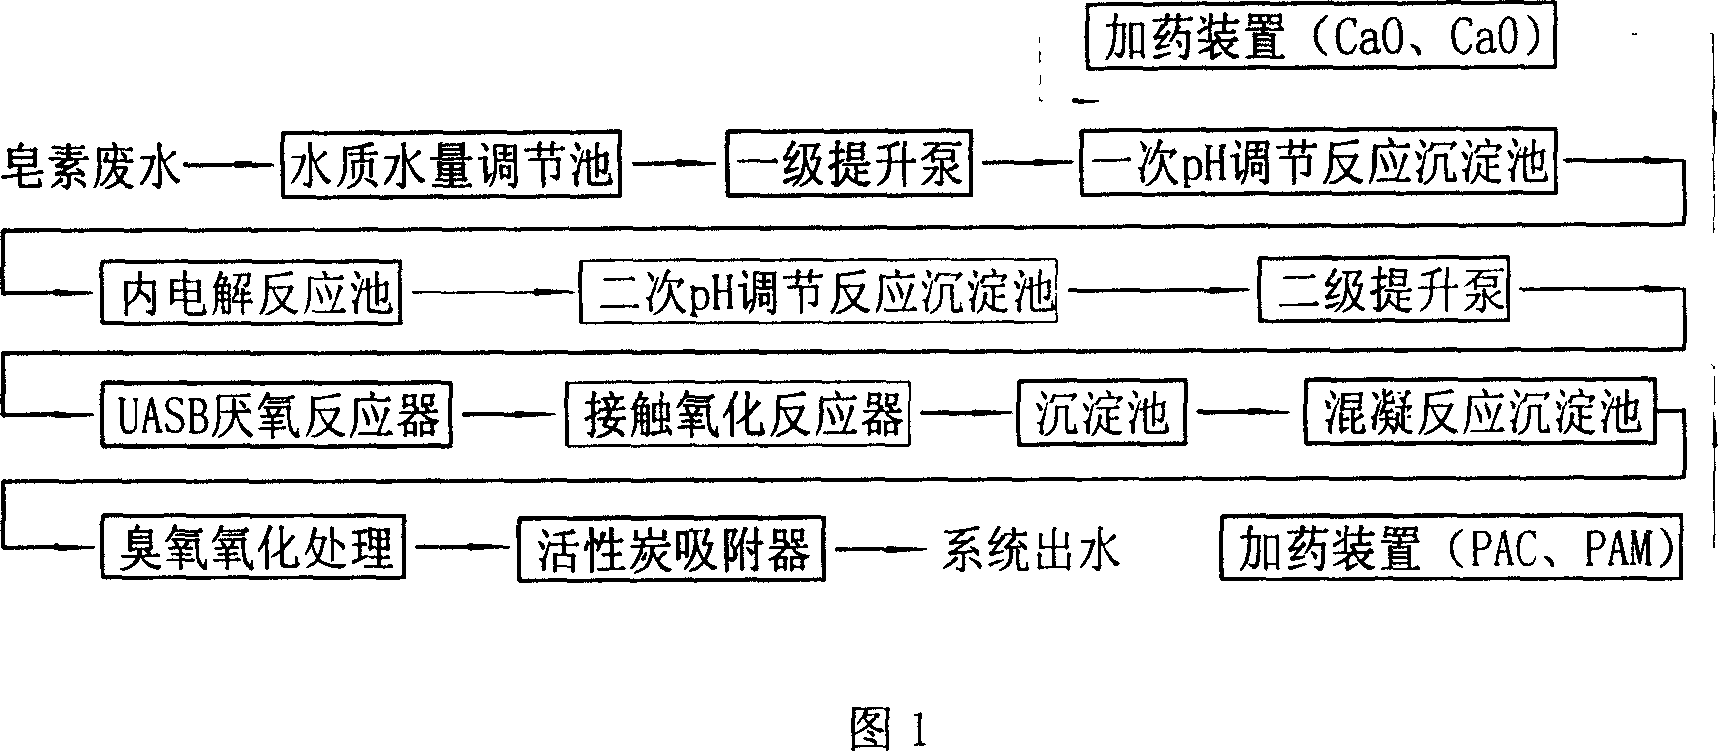 Process for treating yellow ginger saponin waste water by hydrochloric acid method